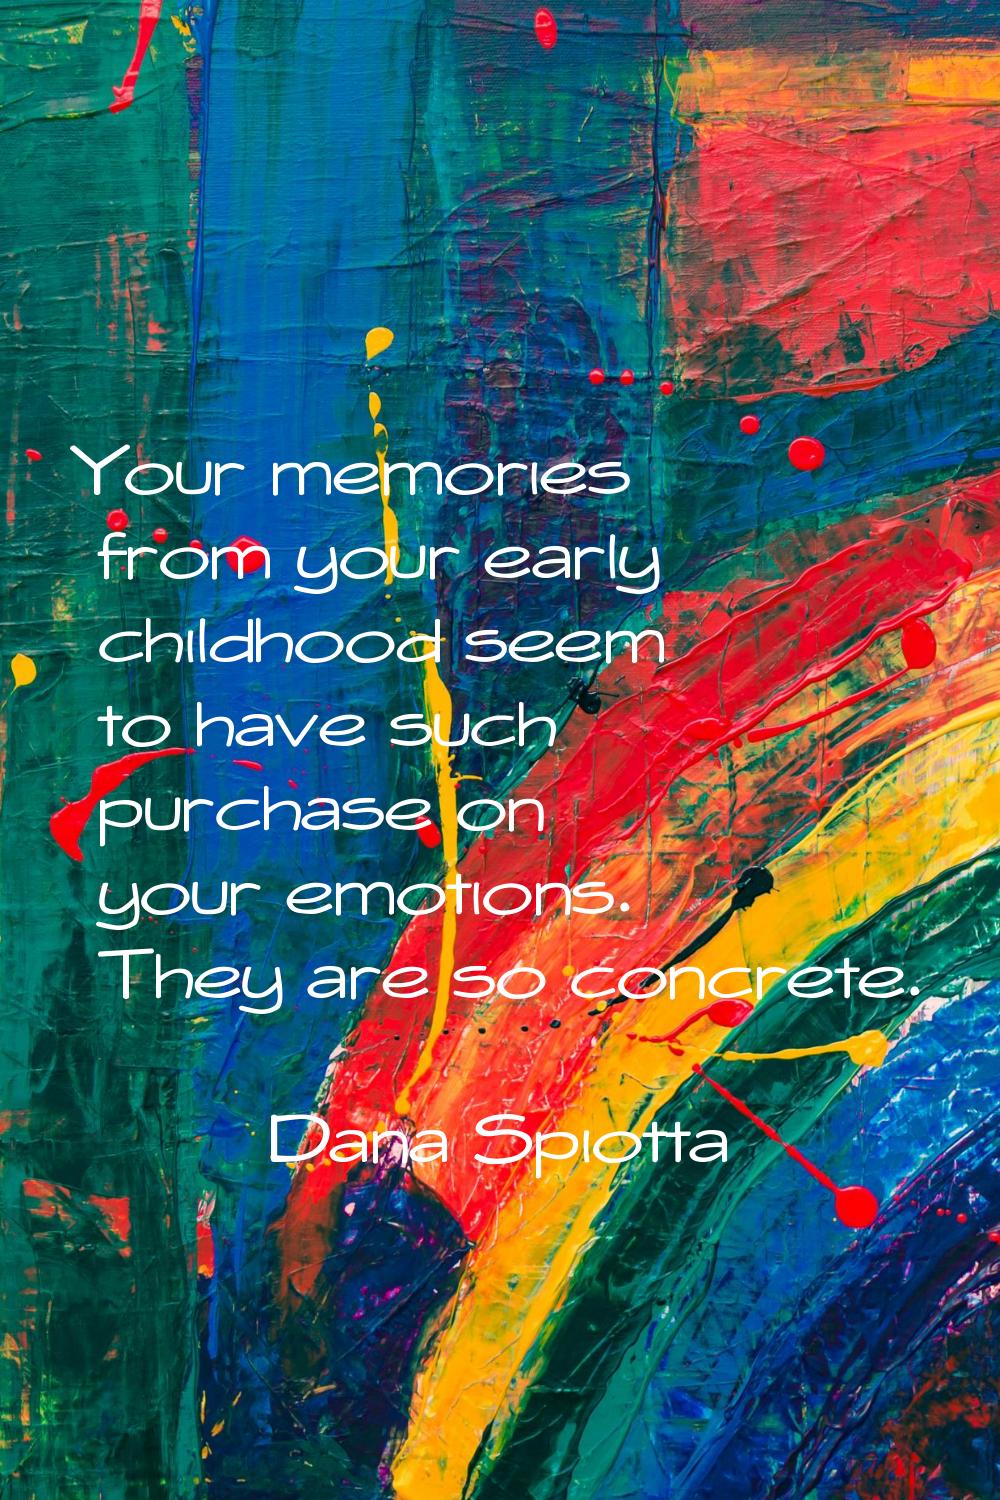 Your memories from your early childhood seem to have such purchase on your emotions. They are so co